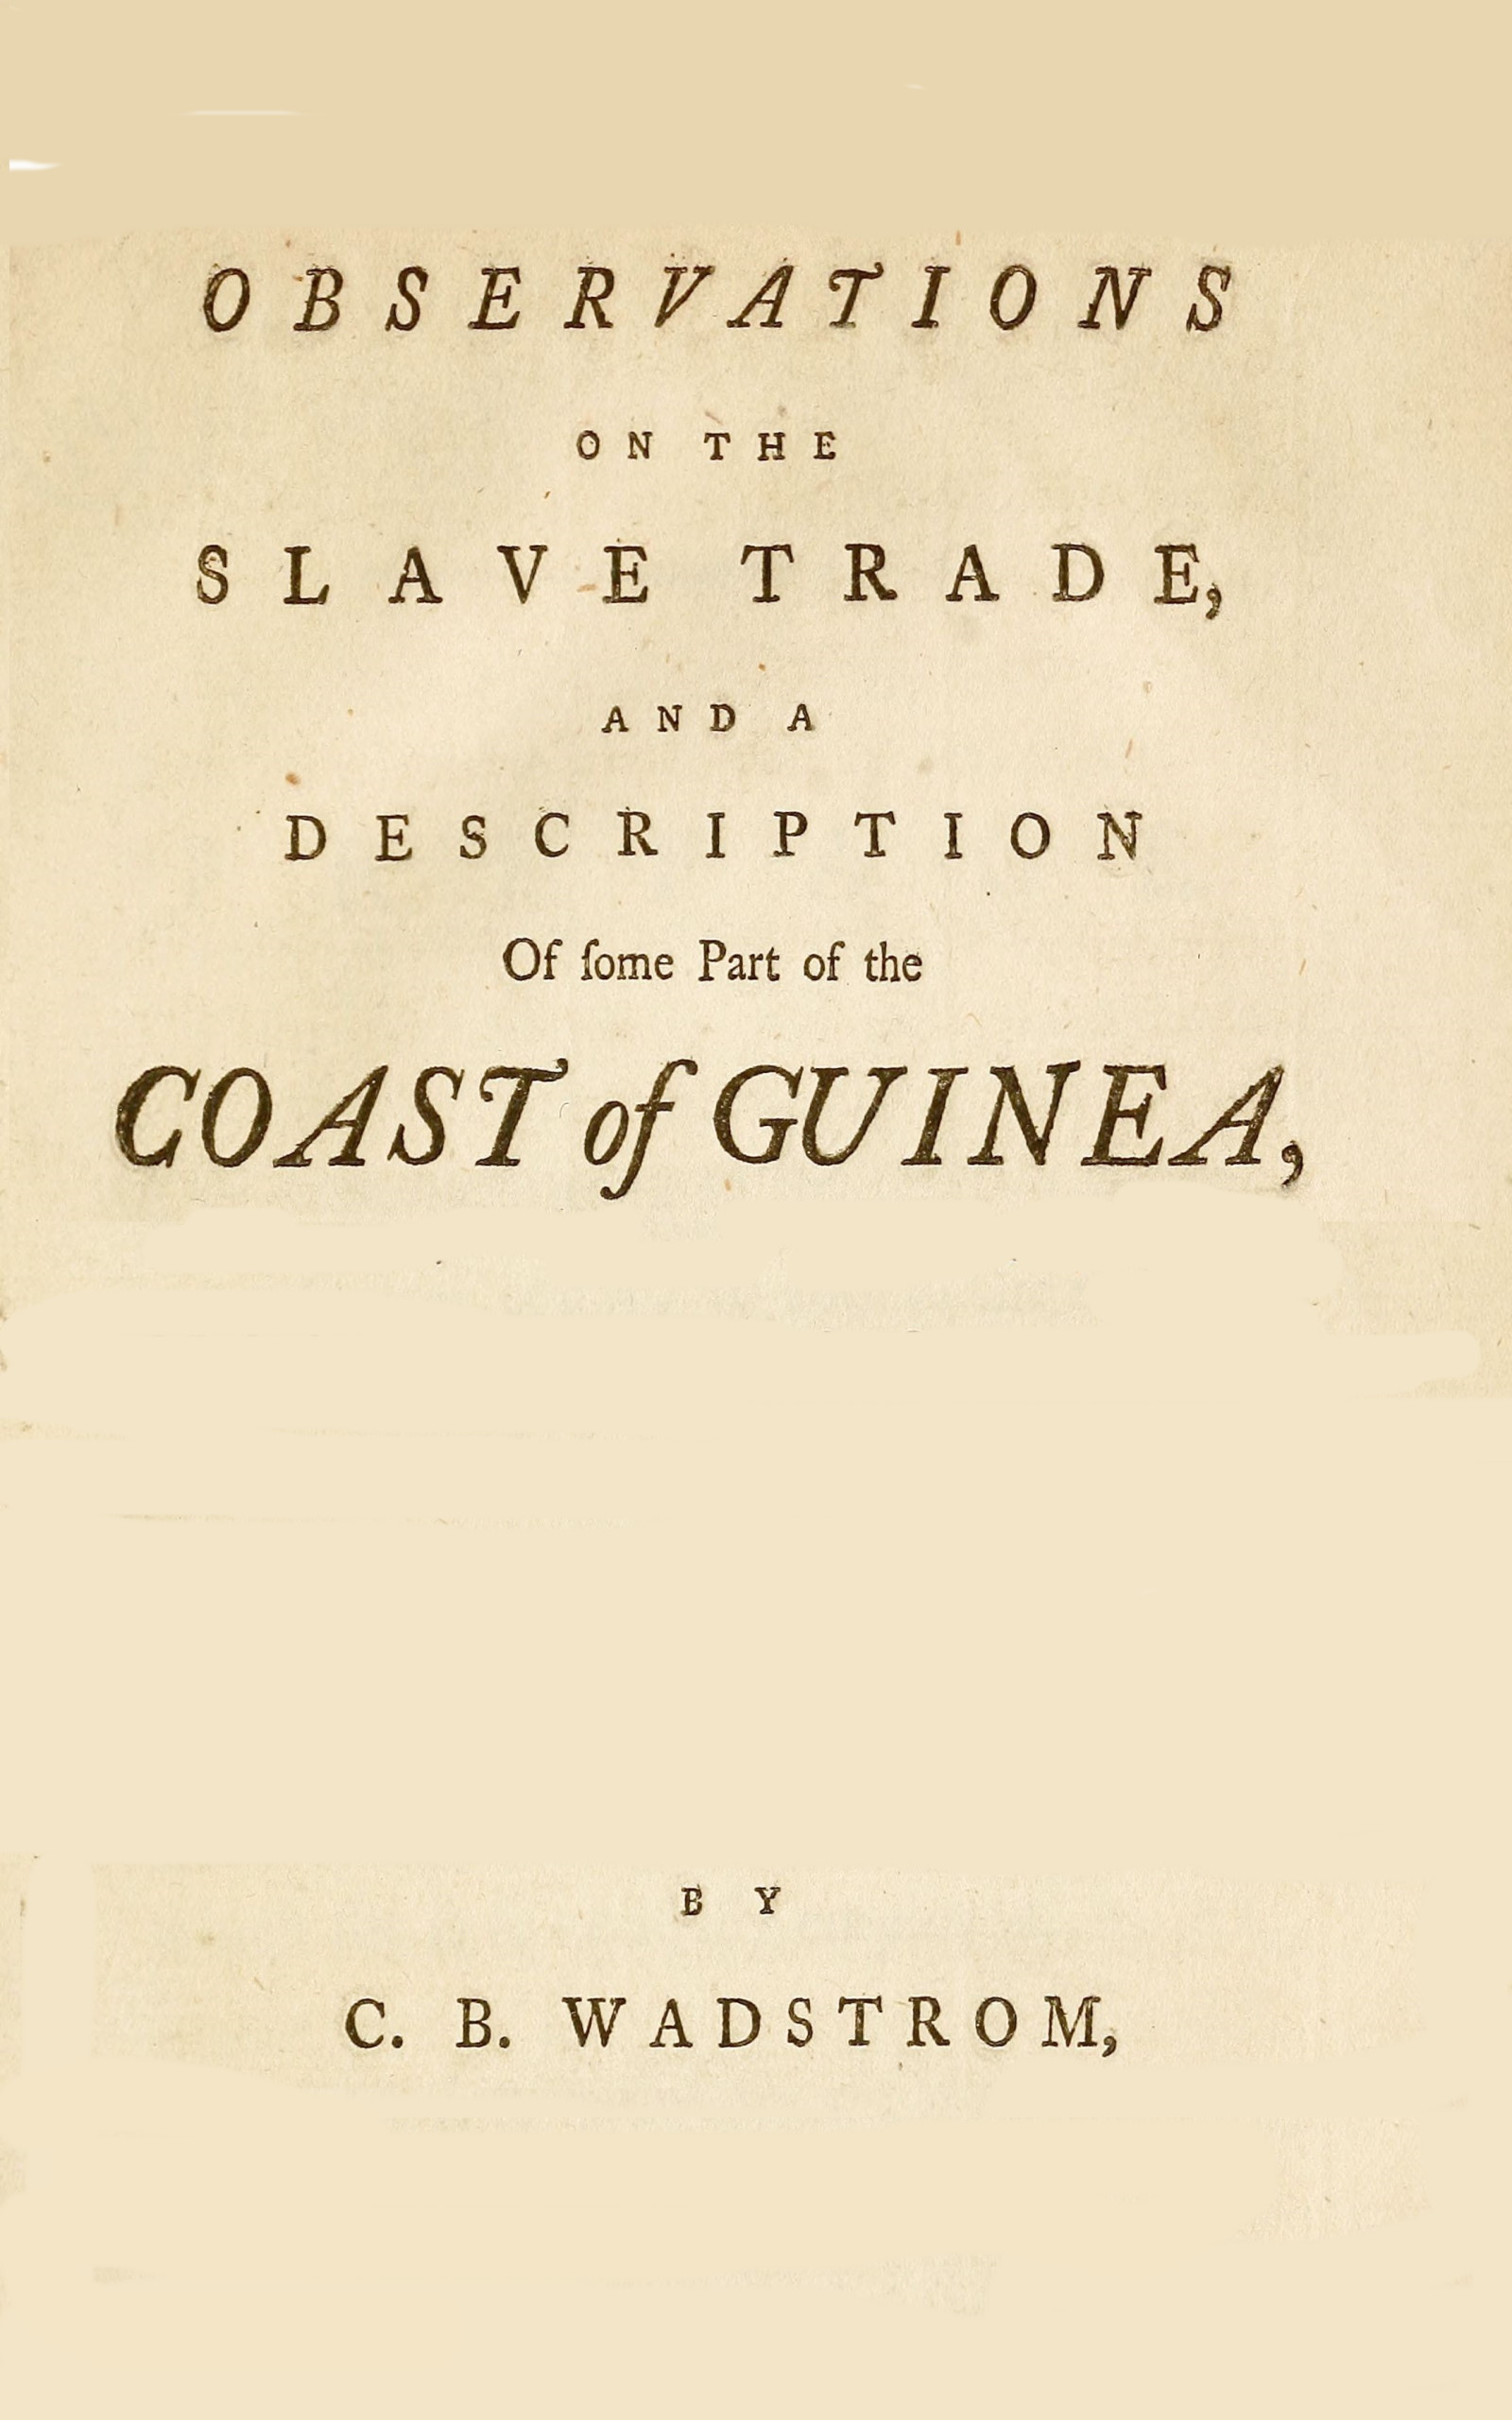 Observations on the slave trade and a description of some part of the coast of Guinea, during a voyage, made in 1787, and 1788, in company with Doctor A. Sparrman and Captain Arrehenius